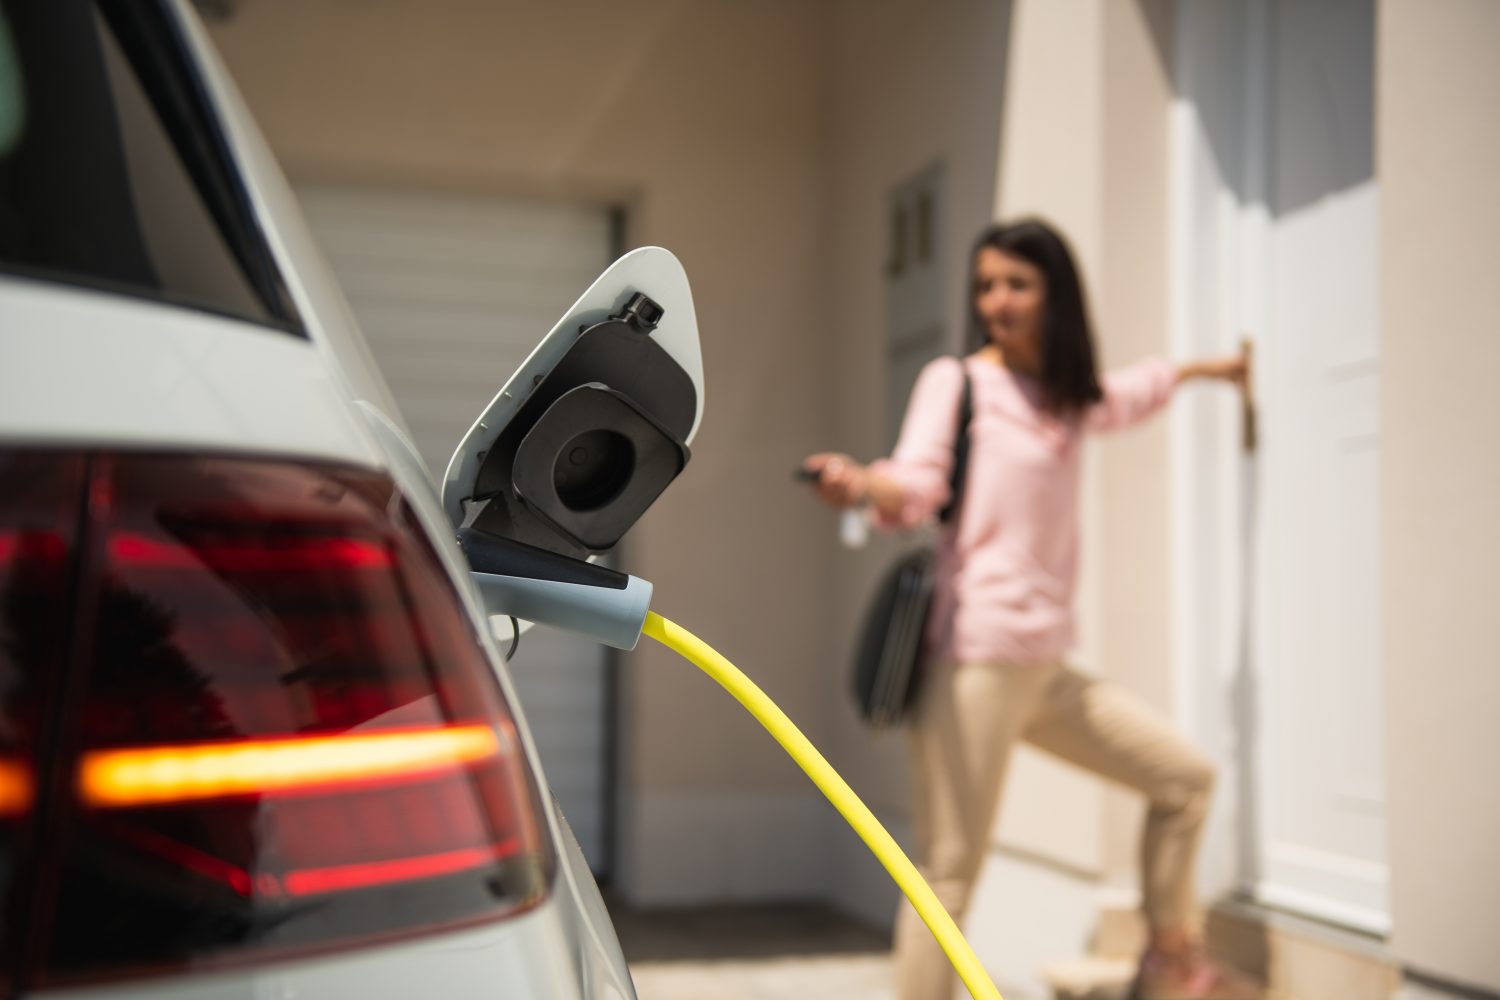 The national average for an "eGallon" is less than half the current price of gas, implying that charging an EV remains more affordable.